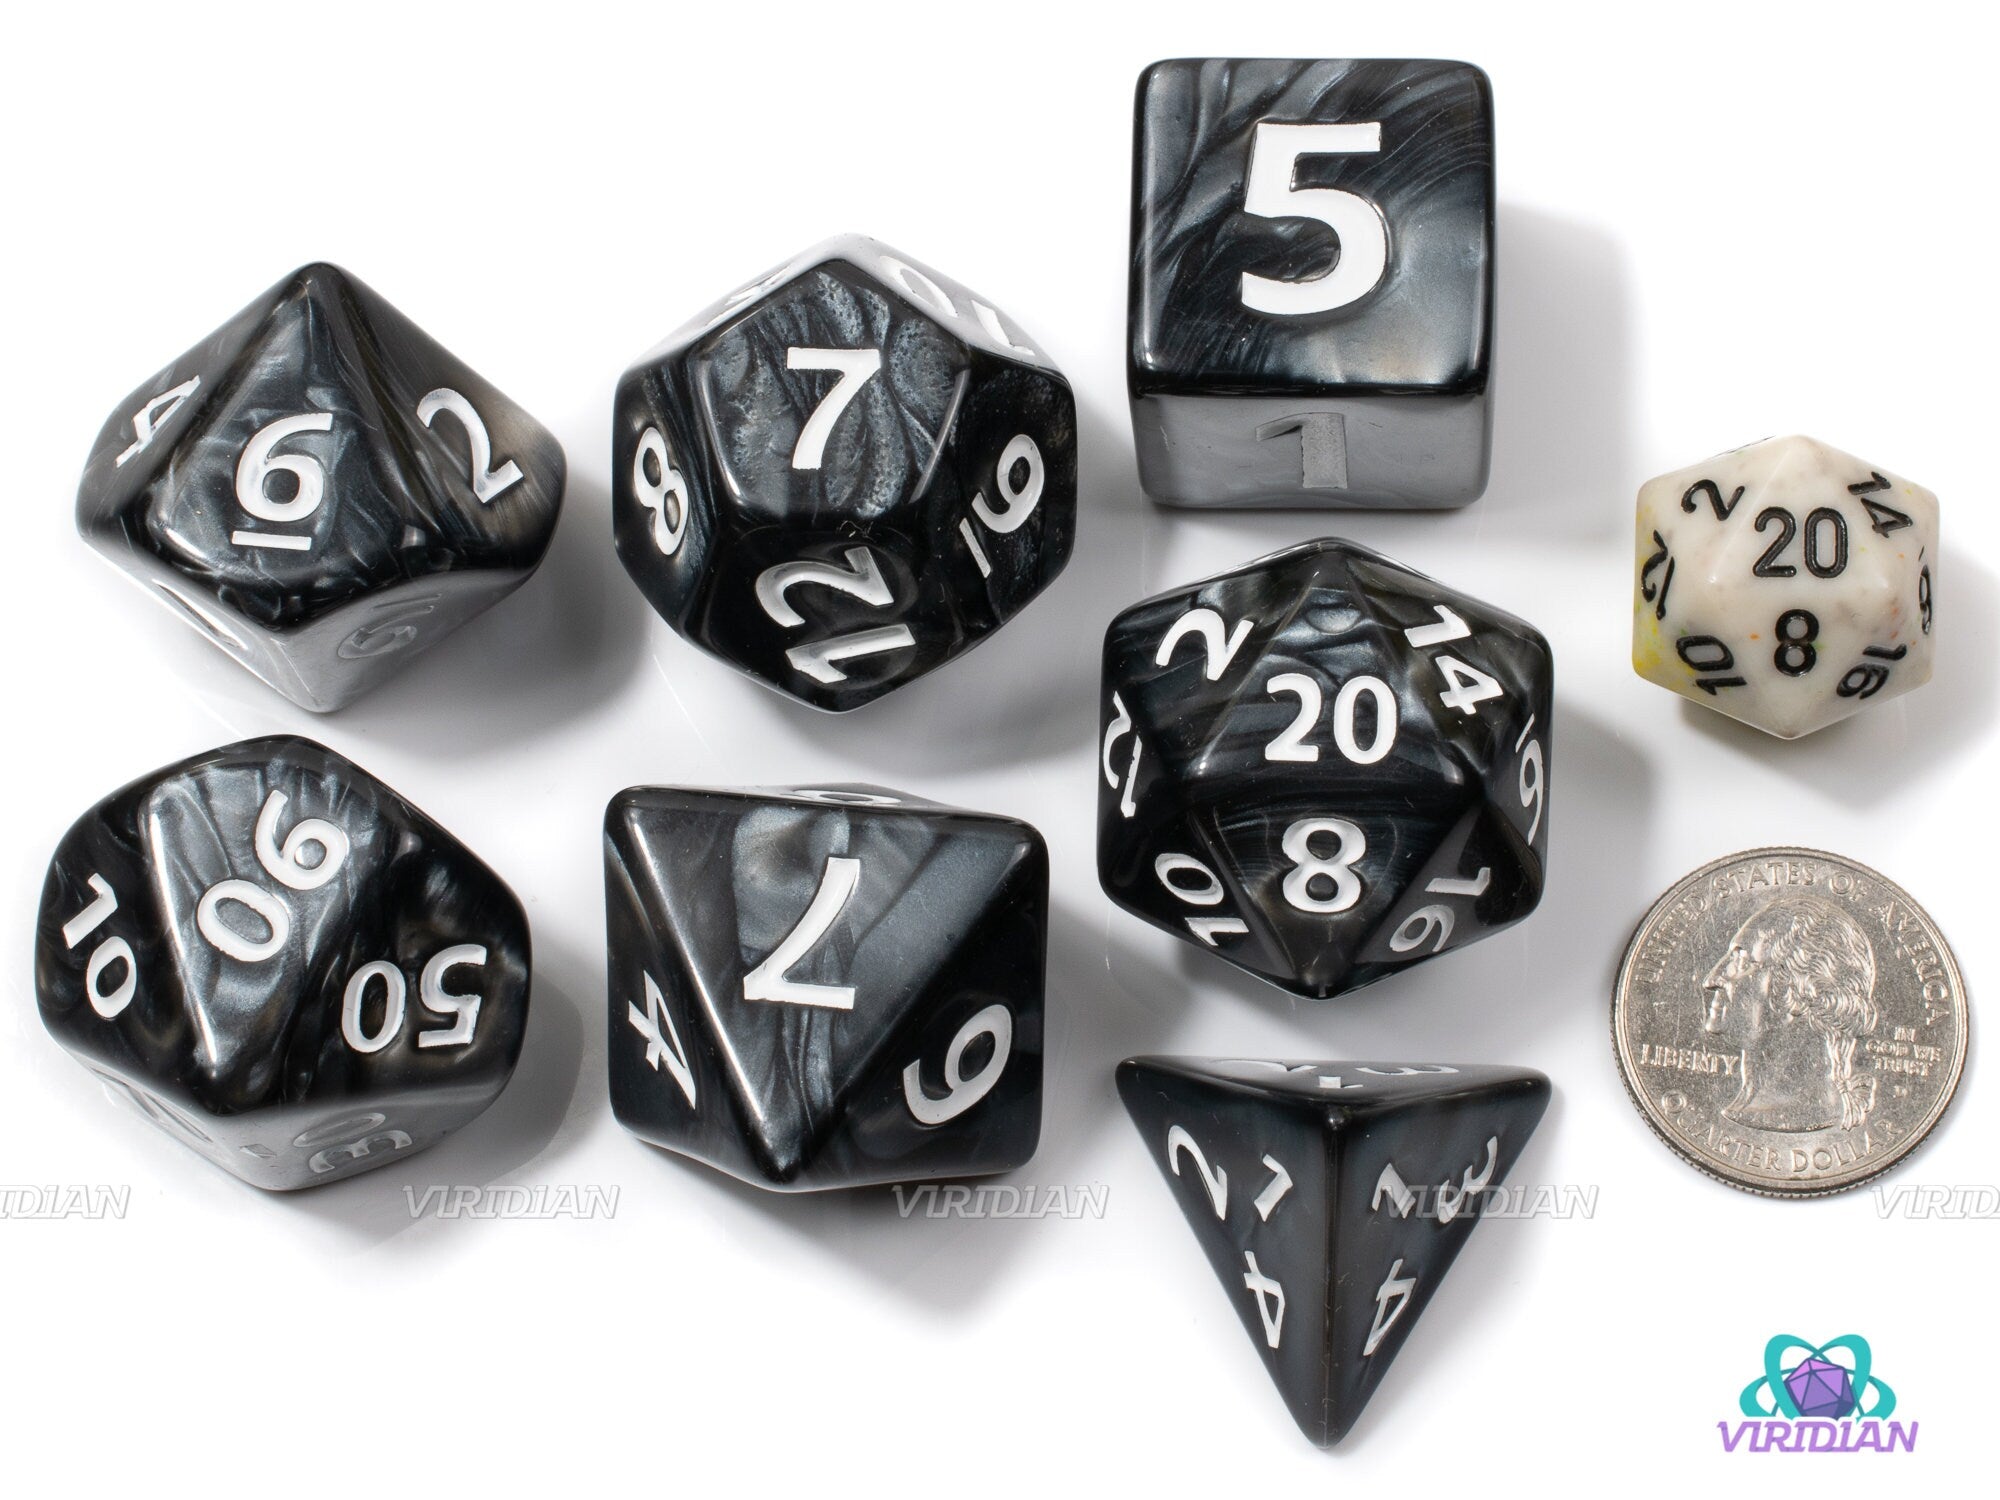 Black Dragon | Giant Black Swirl Acrylic Dice Set (7) | Dungeons and Dragons (DnD)